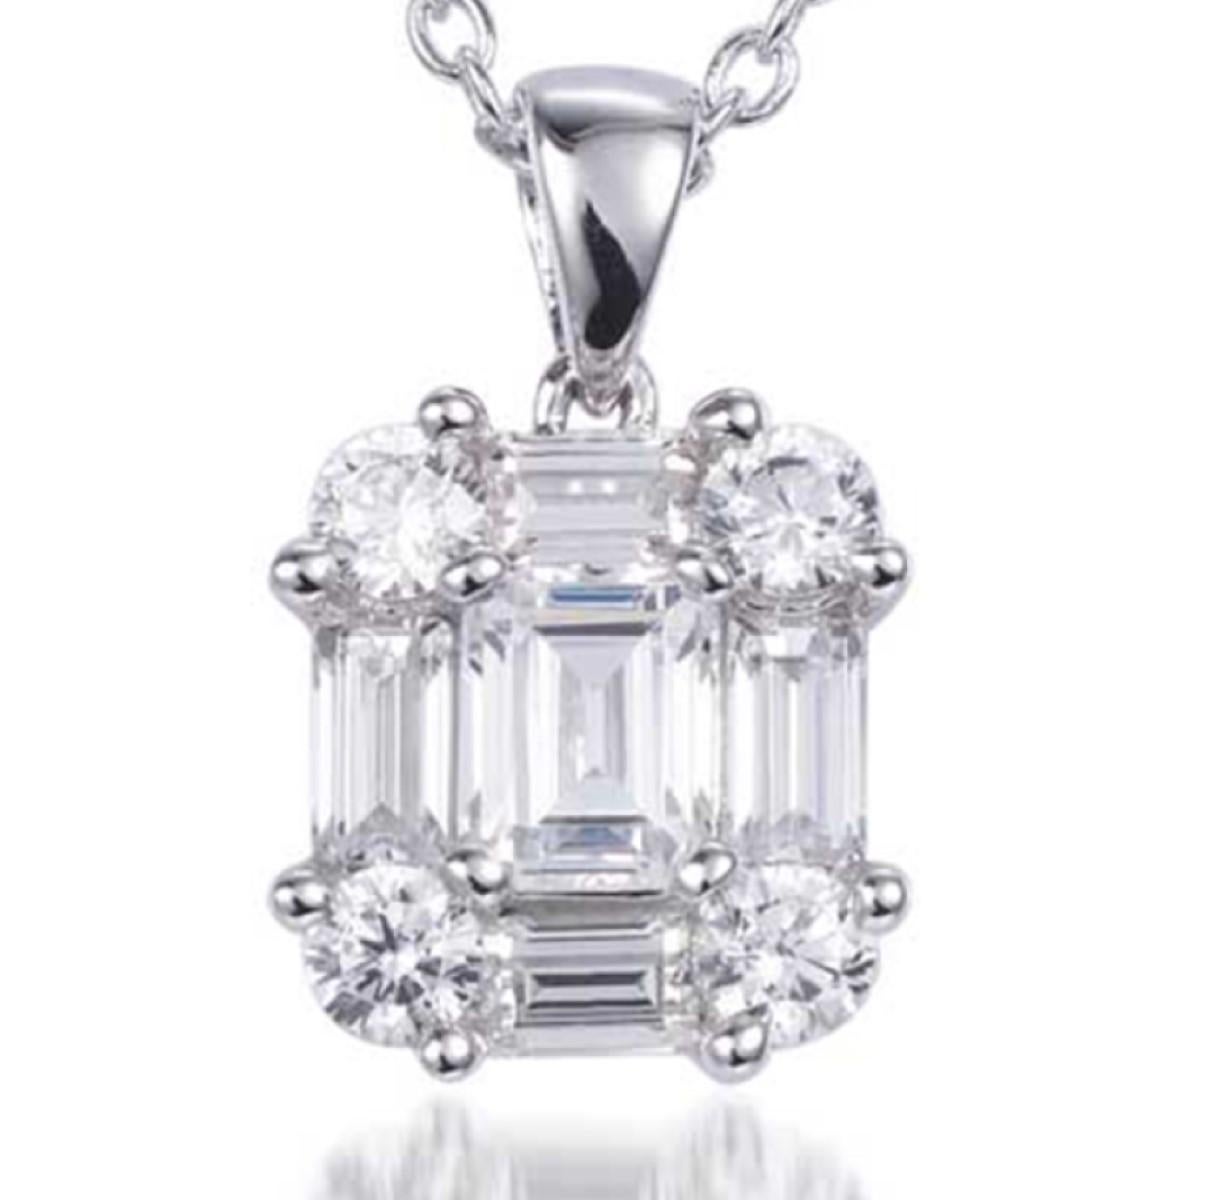 This enchanting pendant features a captivating emerald cut cubic zirconia at its centre, is flanked on all sides by four mini baguette cuts and has four round brilliant cuts set into the corners. 1.37ct total.

Encapsulated in 925 sterling silver